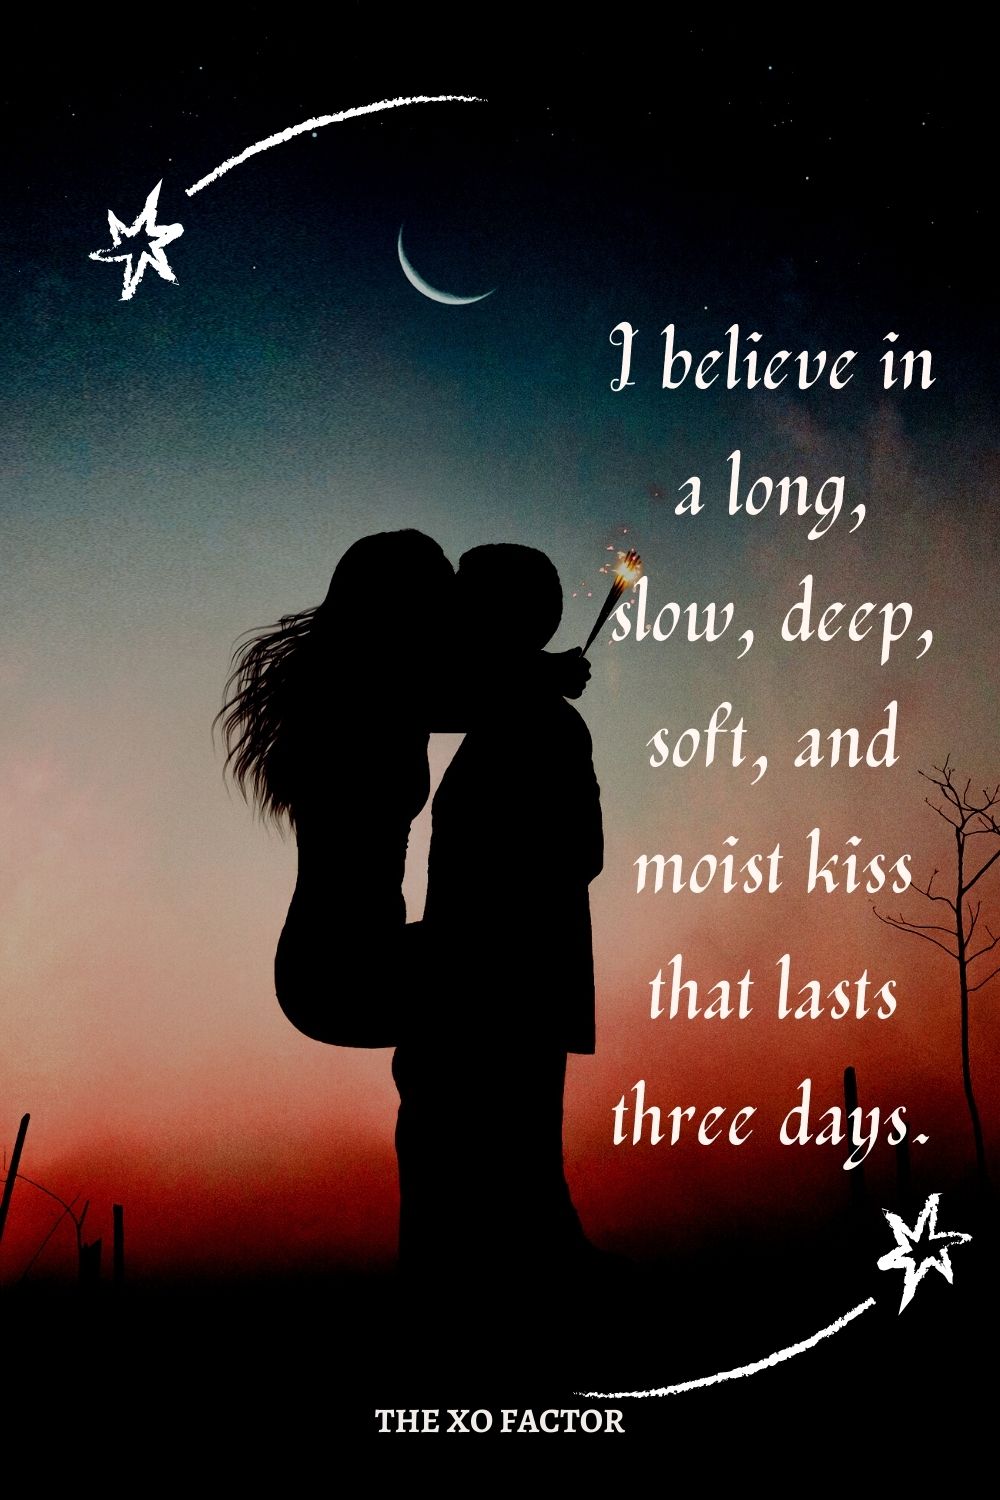 I believe in a long, slow, deep, soft, and moist kiss that lasts three days.